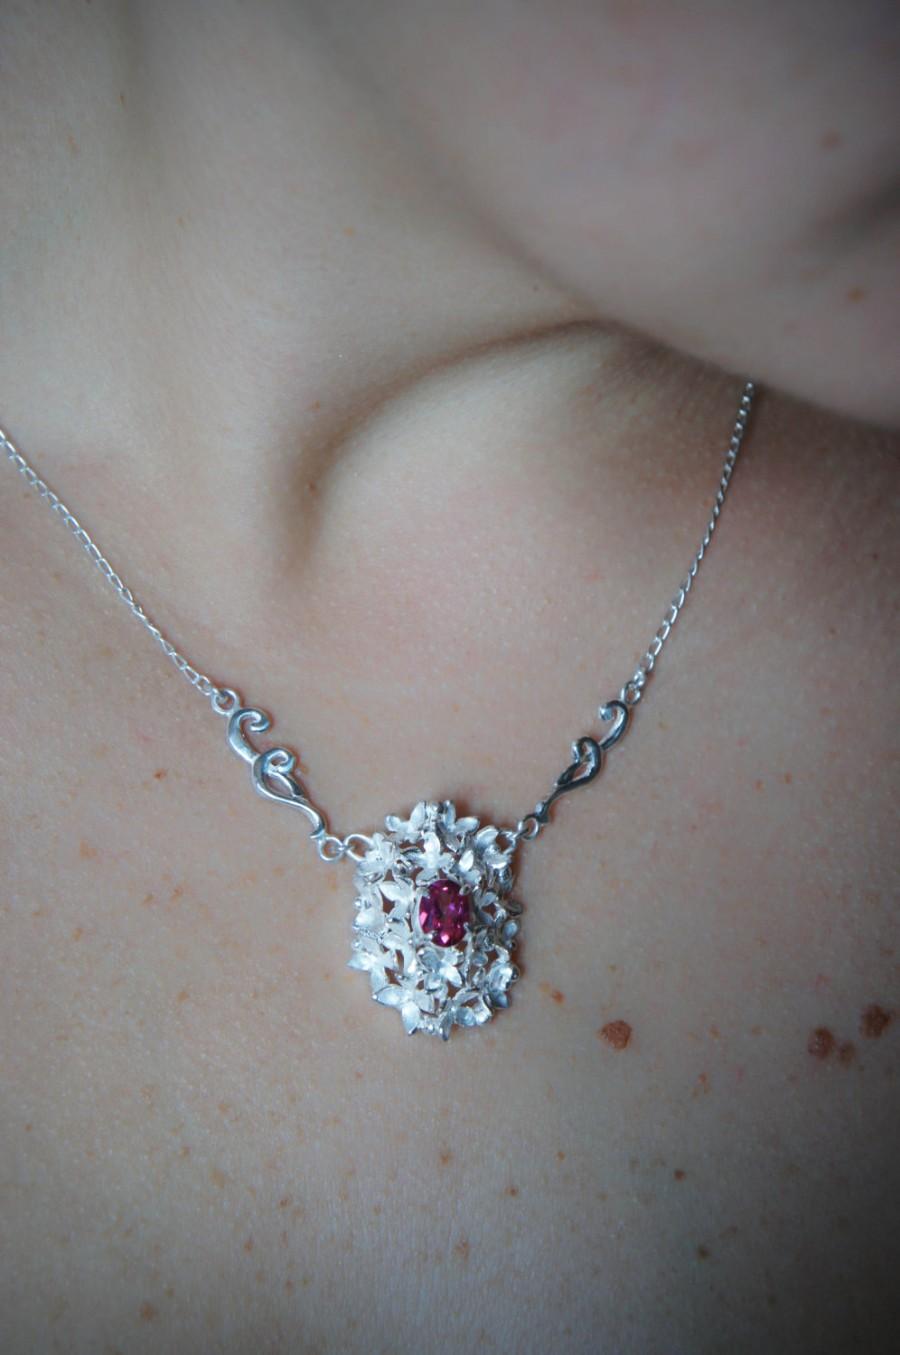 Wedding - Bridal necklace, flower necklace, sterling silver, pink topaz pendant, wedding necklace, bridal jewelry, floral jewelry, heirloom, romantic